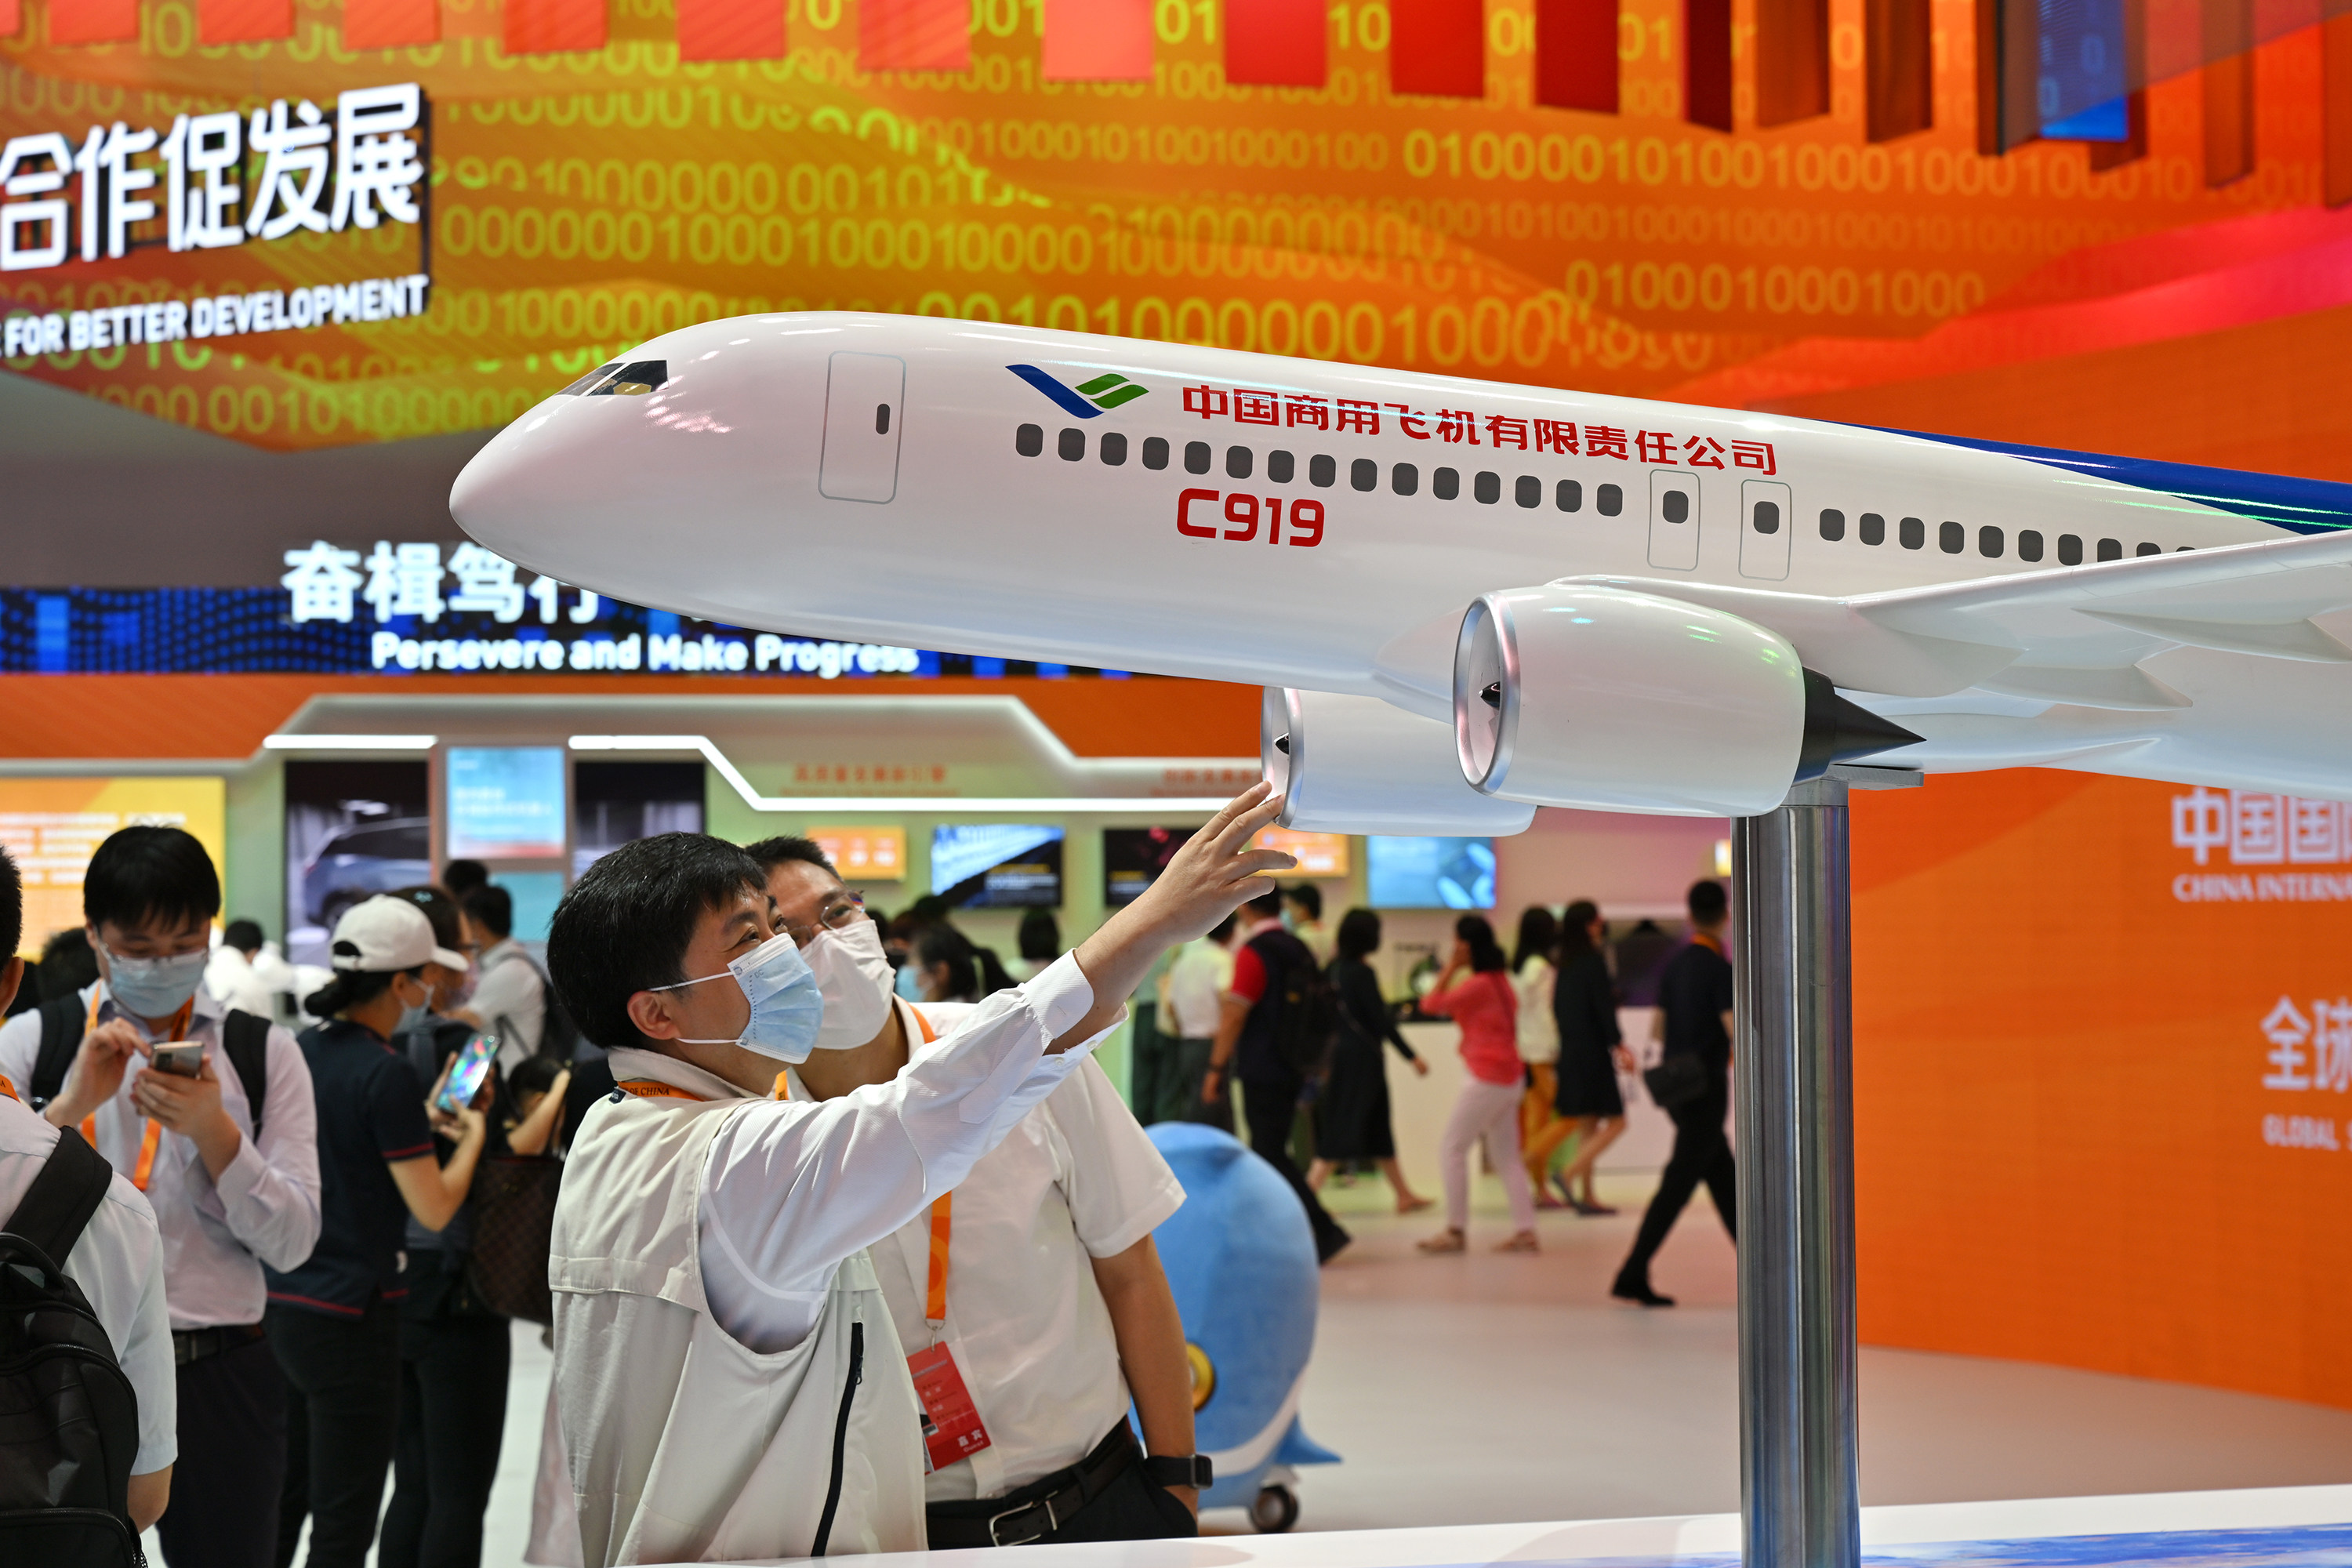 The single-aisle C919 has been built to compete with Boeing’s 737 and Airbus’ A320. Photo: Xinhua